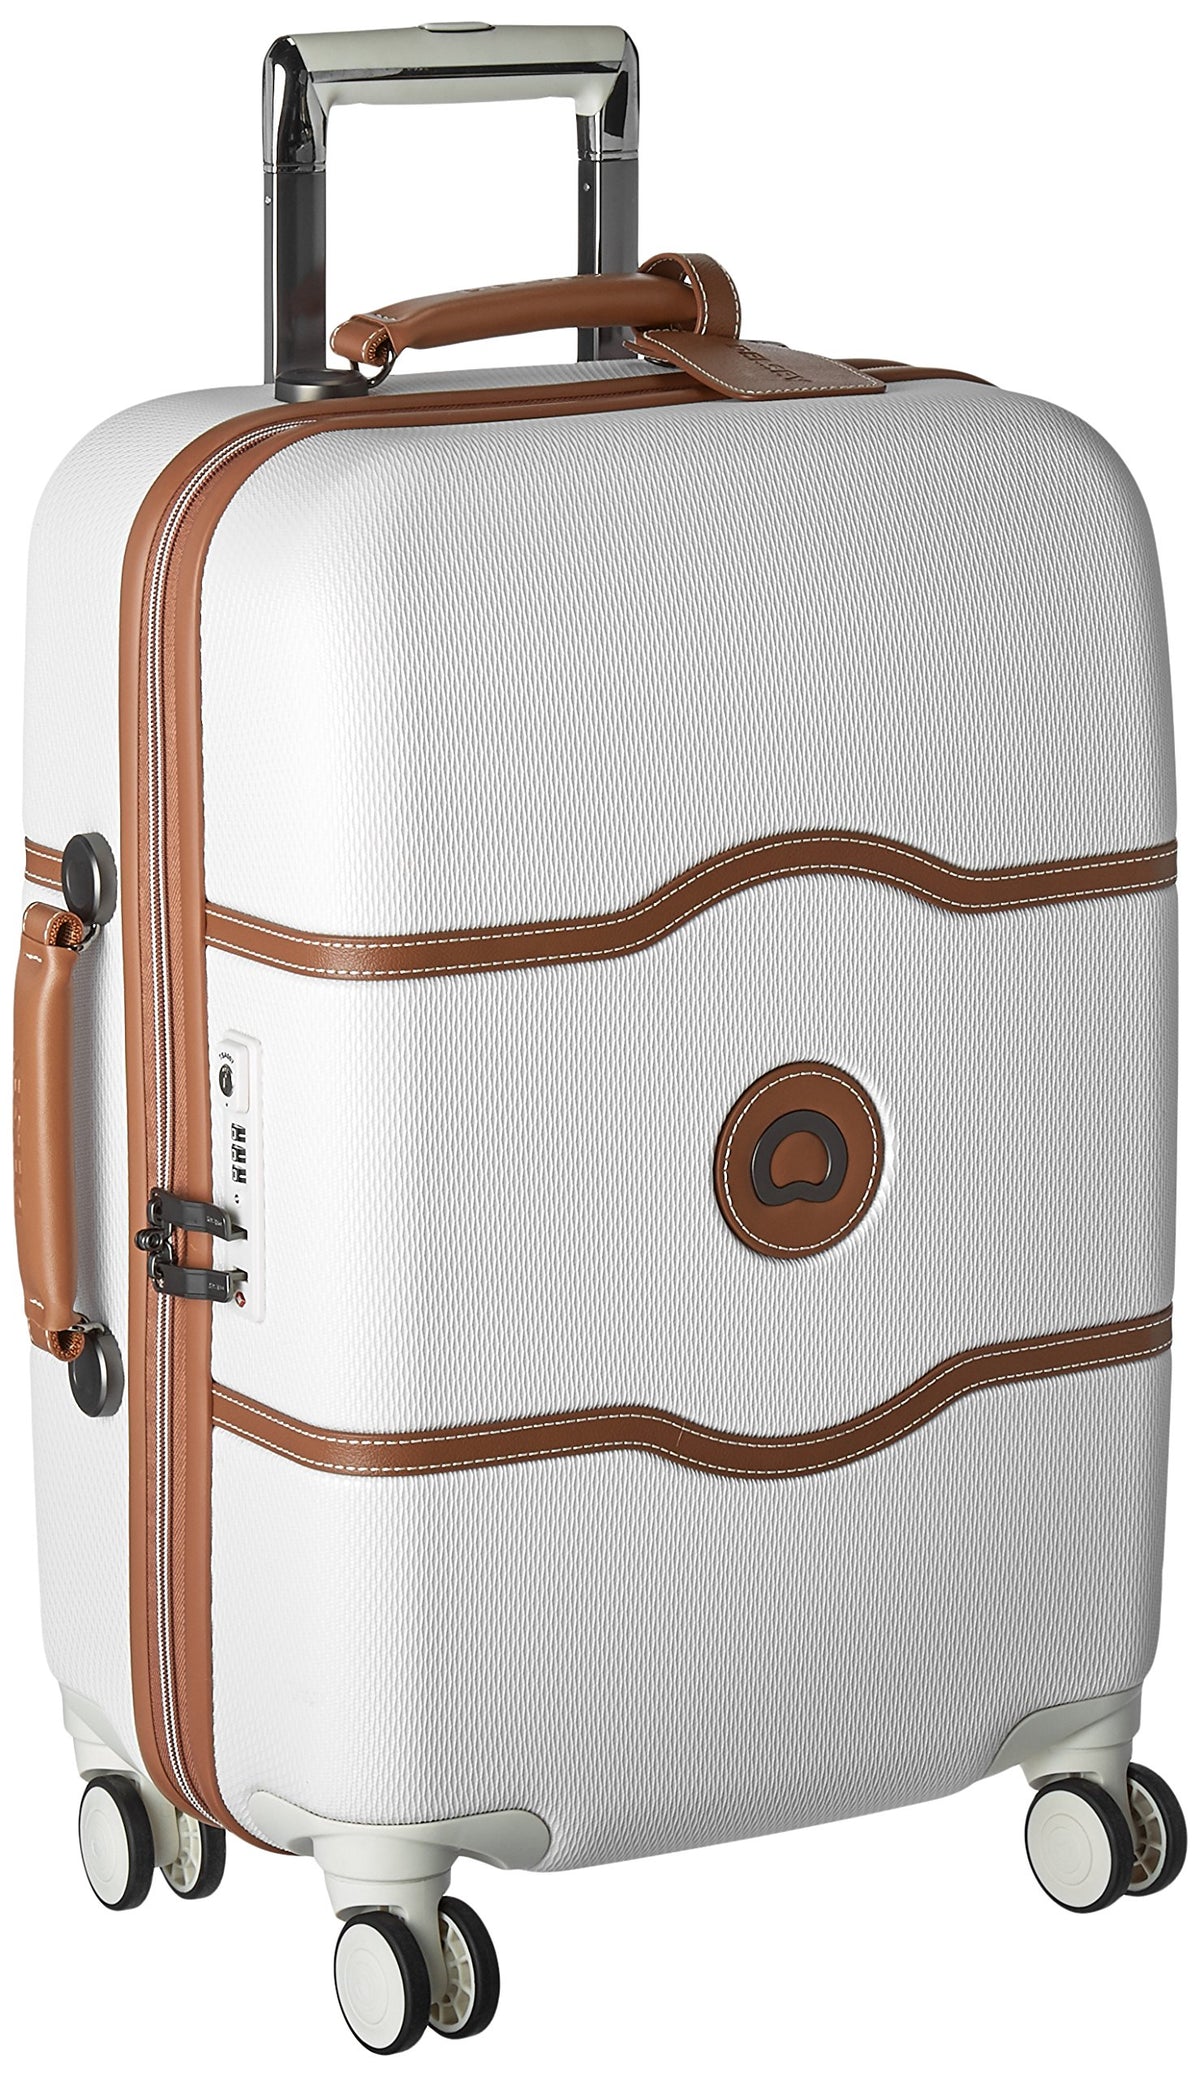 DELSEY Paris Chatelet Air 2.0 Hardside Luggage with Spinner Wheels - Champagne White/Carry-on 21 Inch, with Brake